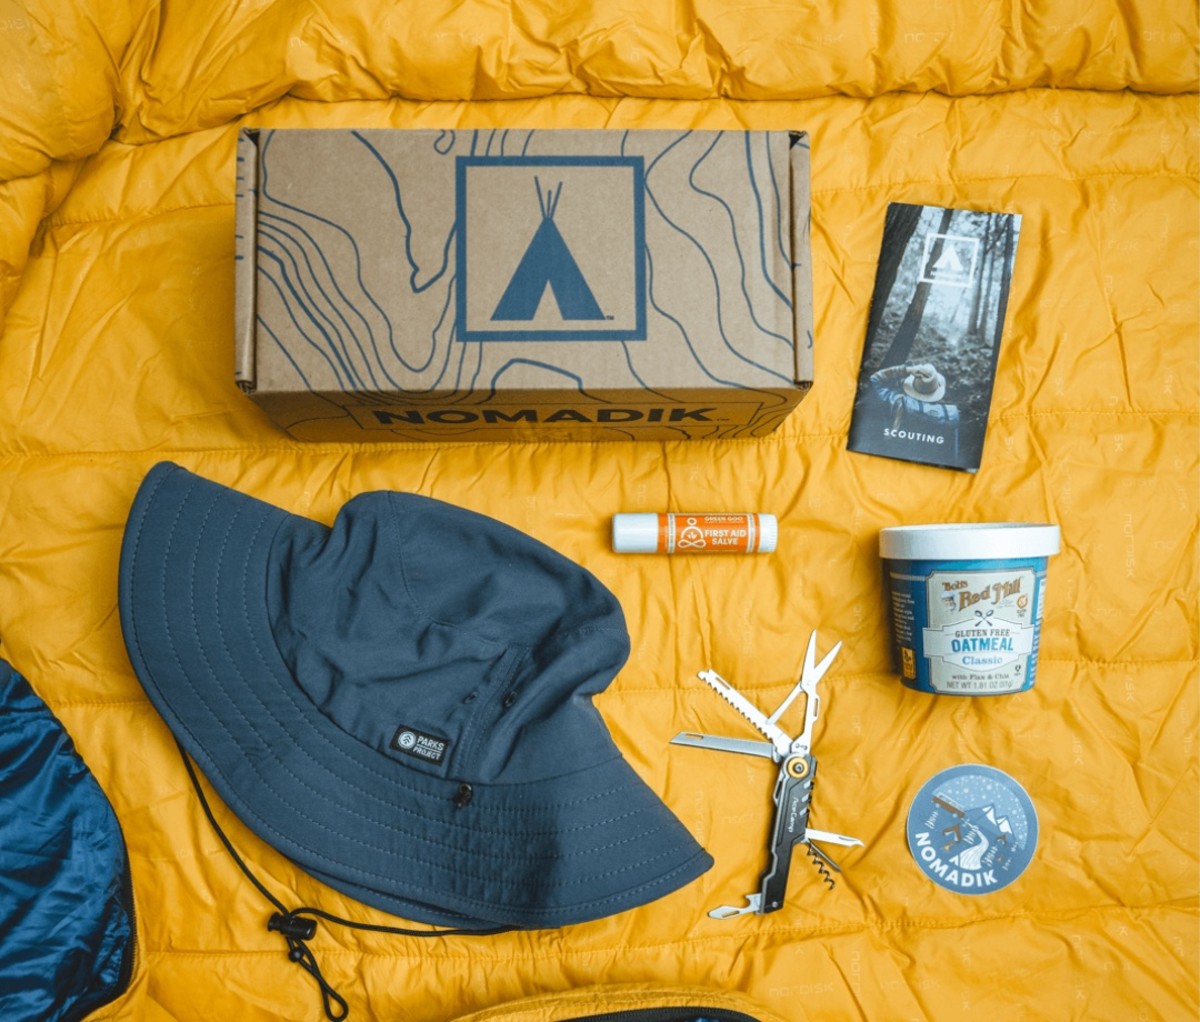 The Nomadik items laid out on a yellow sleeping bag